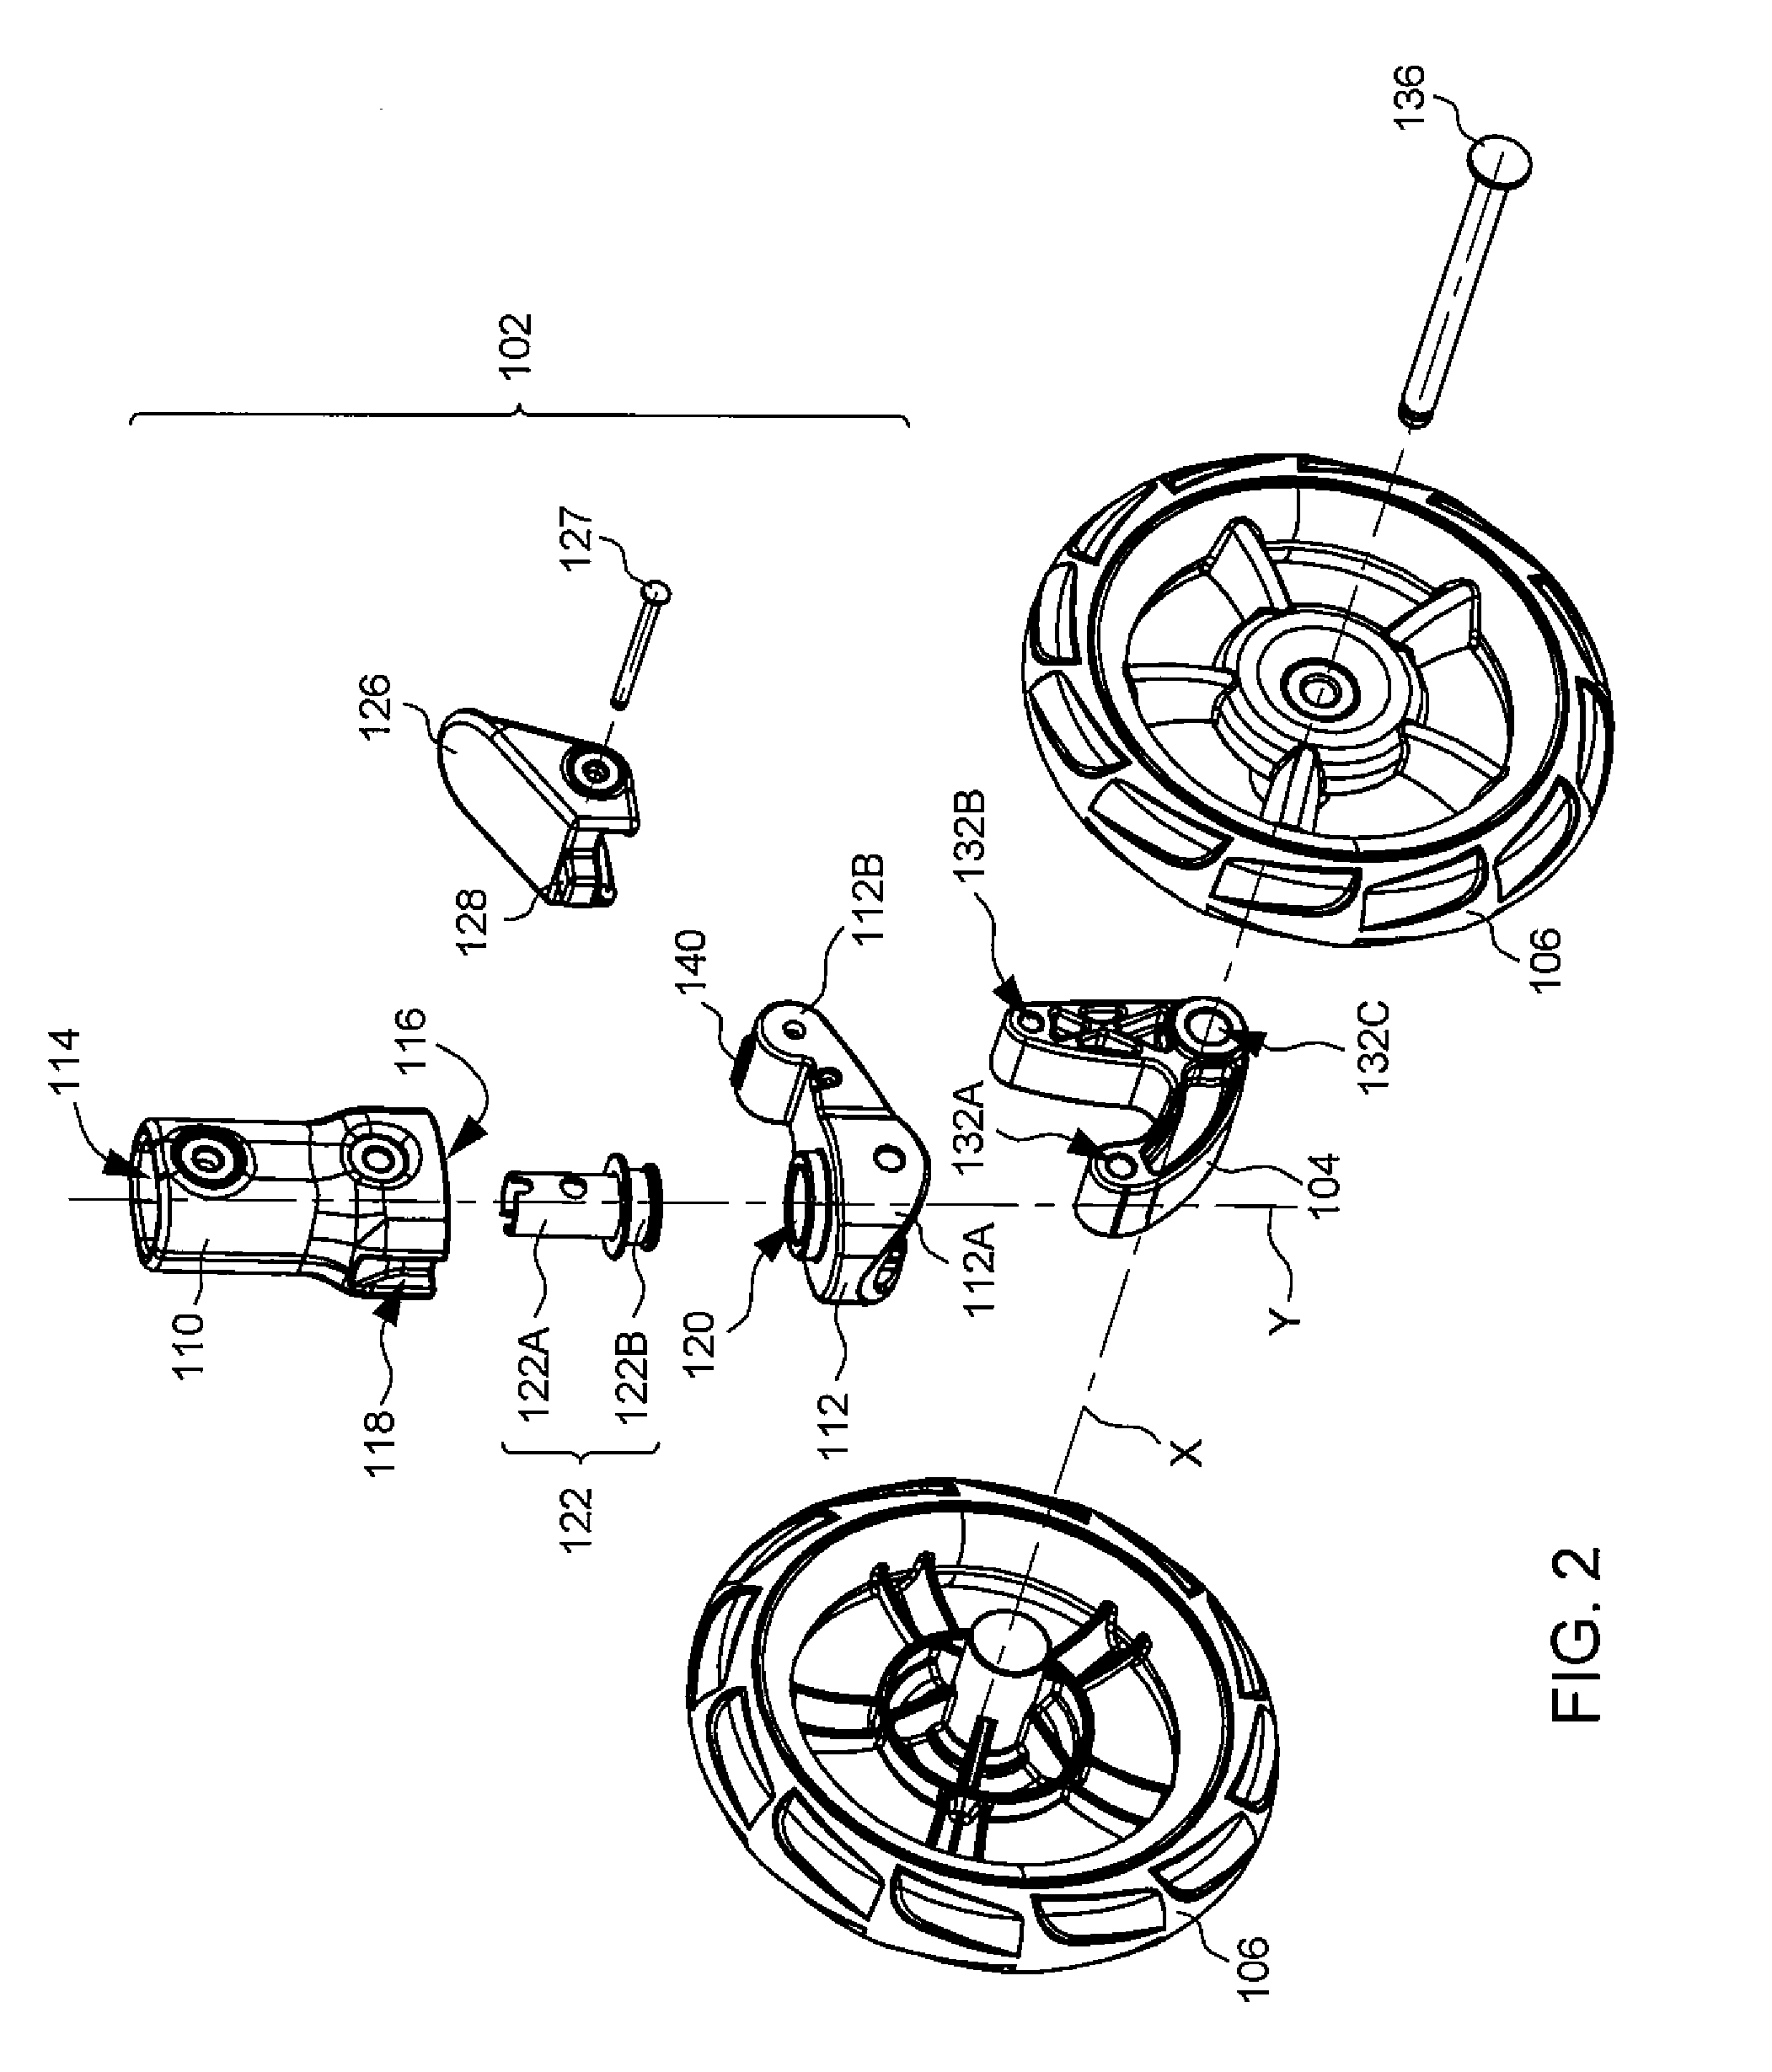 Wheel assembly for an infant carrier apparatus